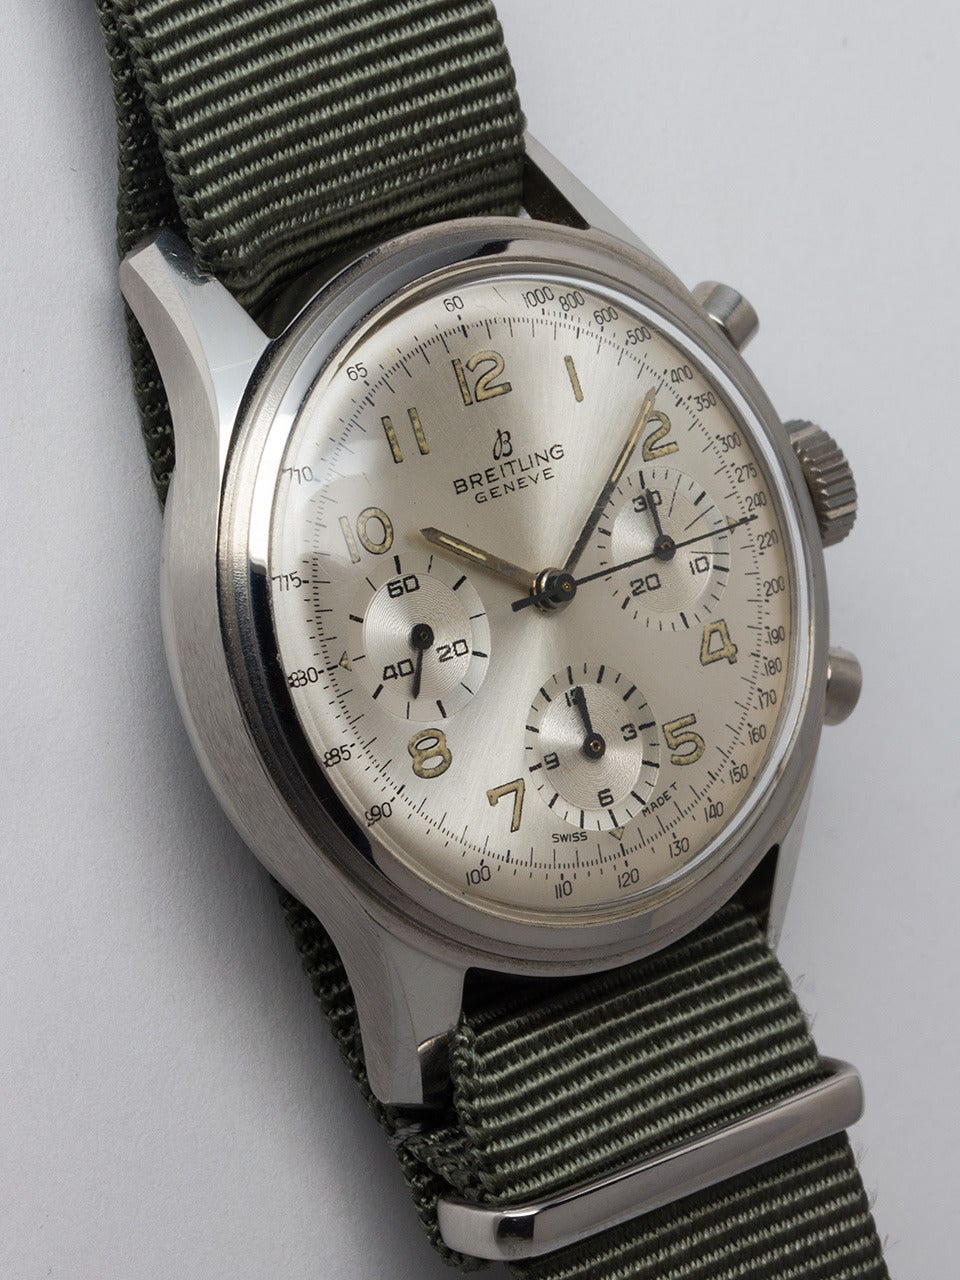 Breitling Stainless Steel Chronograph Wristwatch ref 765 circa 1960s. Large 38mm diameter screw back case with round pushers chronograph. Original silvered satin dial with matching patina'd luminous indexes and hands. Powered by Venus calibre 178